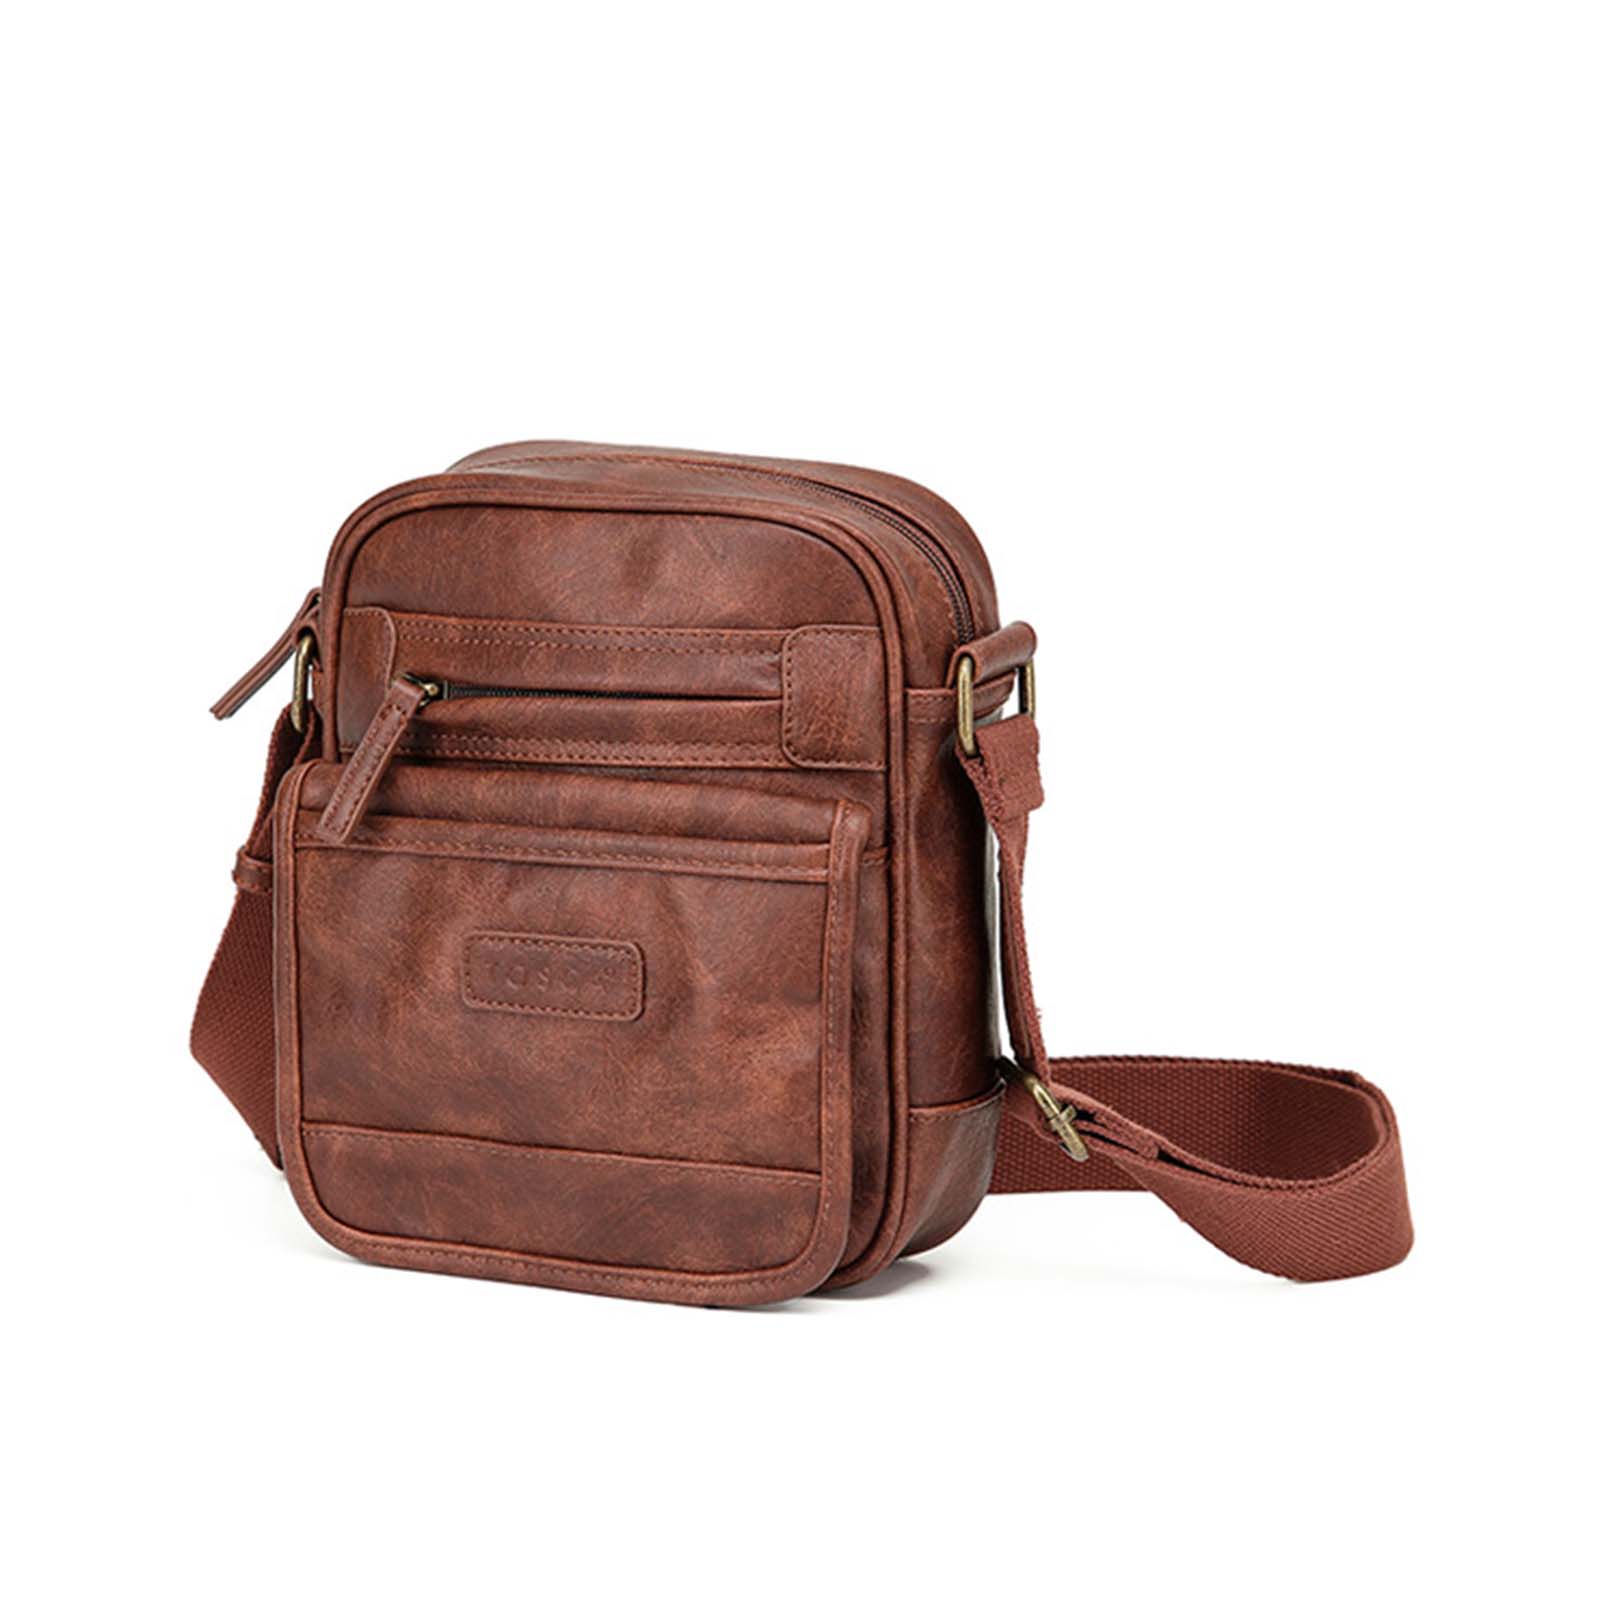 tosca-vl-crossover-bag-with-pocket-brown-front-angle